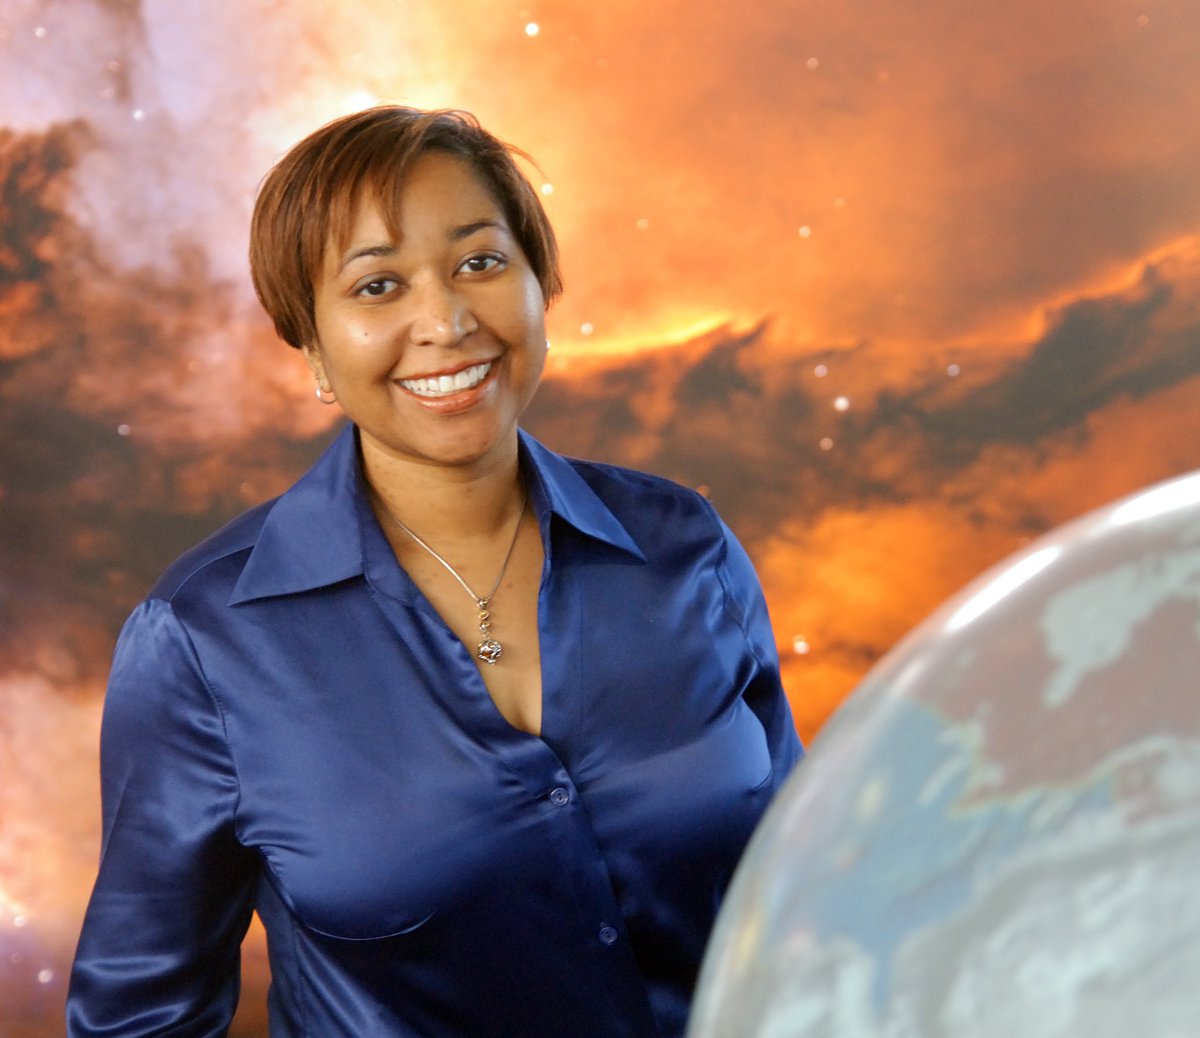 One of the heartbreaking losses on my journey was Dr. Beth Brown, who was the 1st Black woman to earn a phd in astro from U of Michigan. I knew very few Black women working in the field in perm positions. When she died I was crushed. What a loss for NASA & us all.  #BlackinAstro